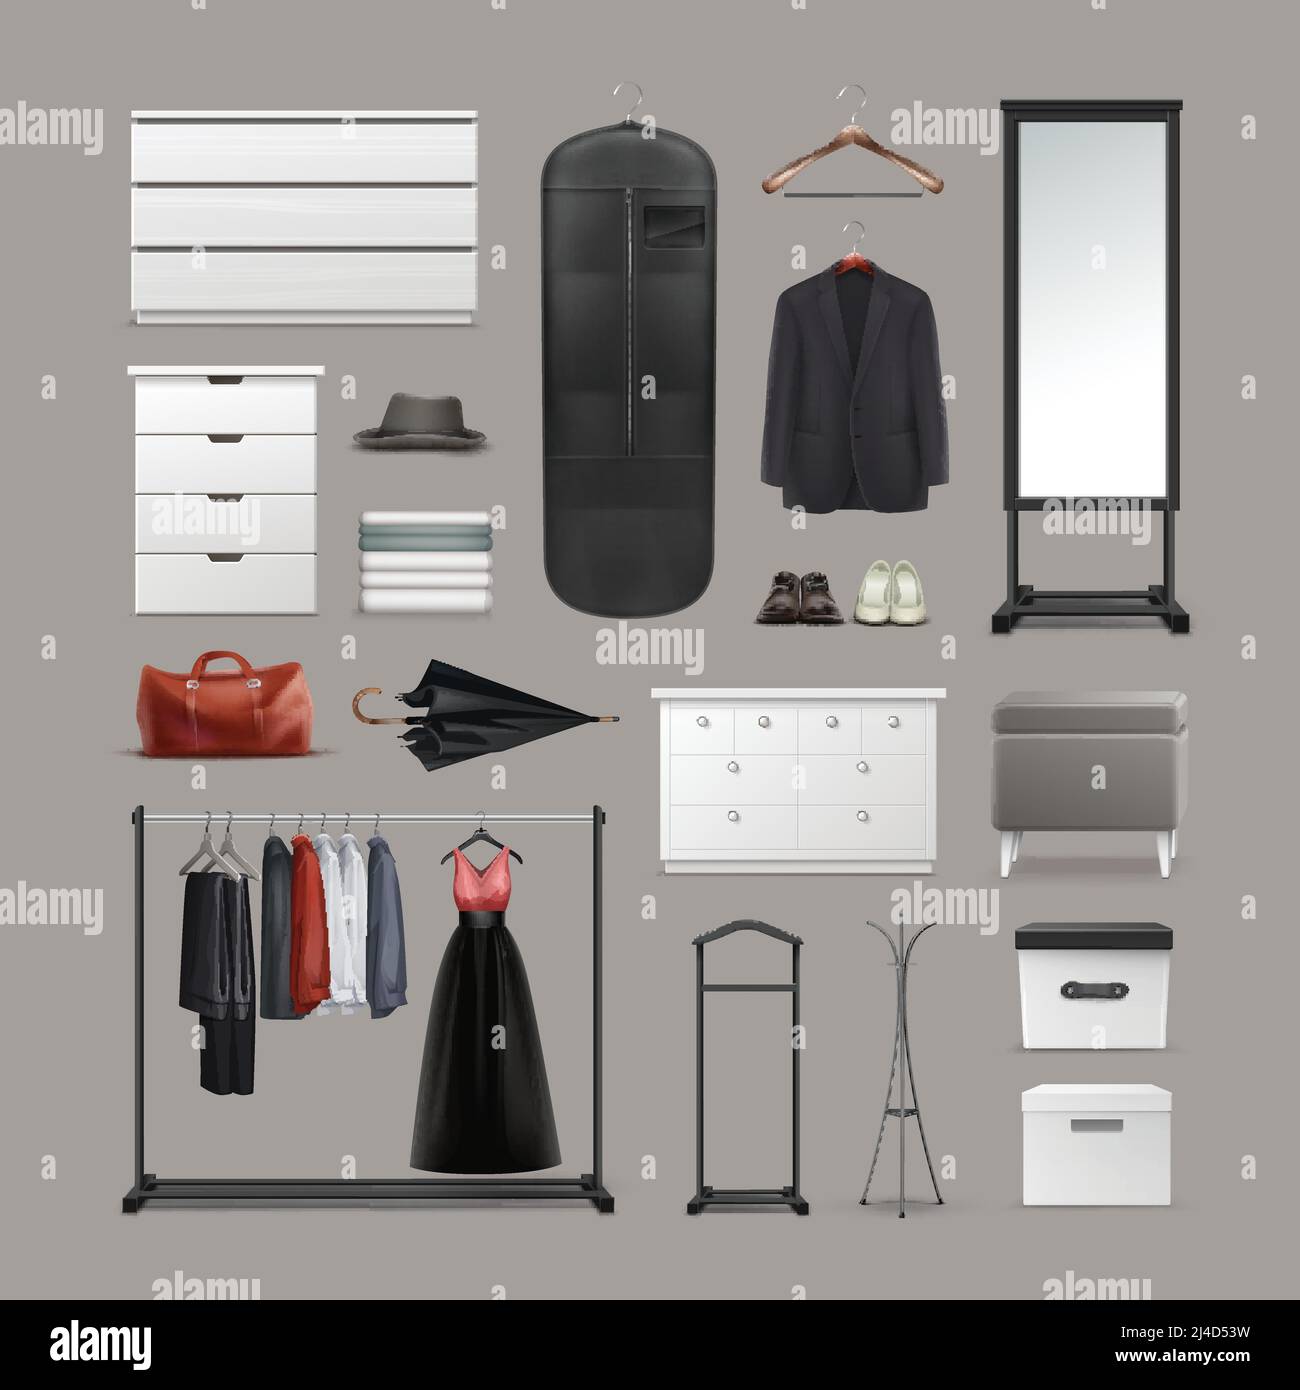 Vector set of wardrobe stuff hangers, boxes, mirror, pouf, racks and stands, different clothes, bag, shoes and umbrella front view isolated on backgro Stock Vector